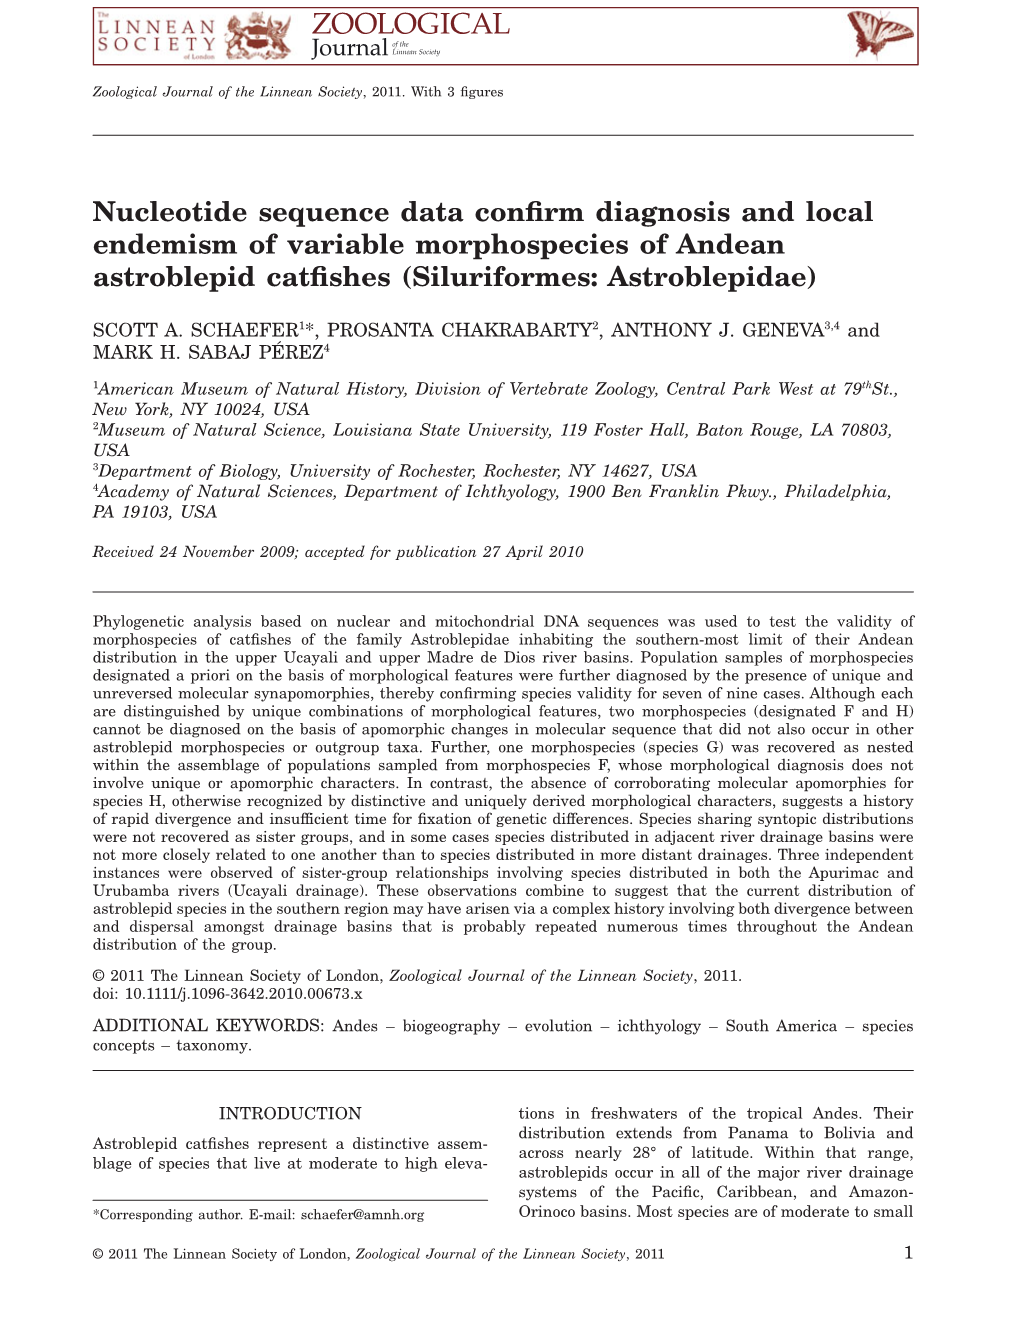 Nucleotide Sequence Data Confirm